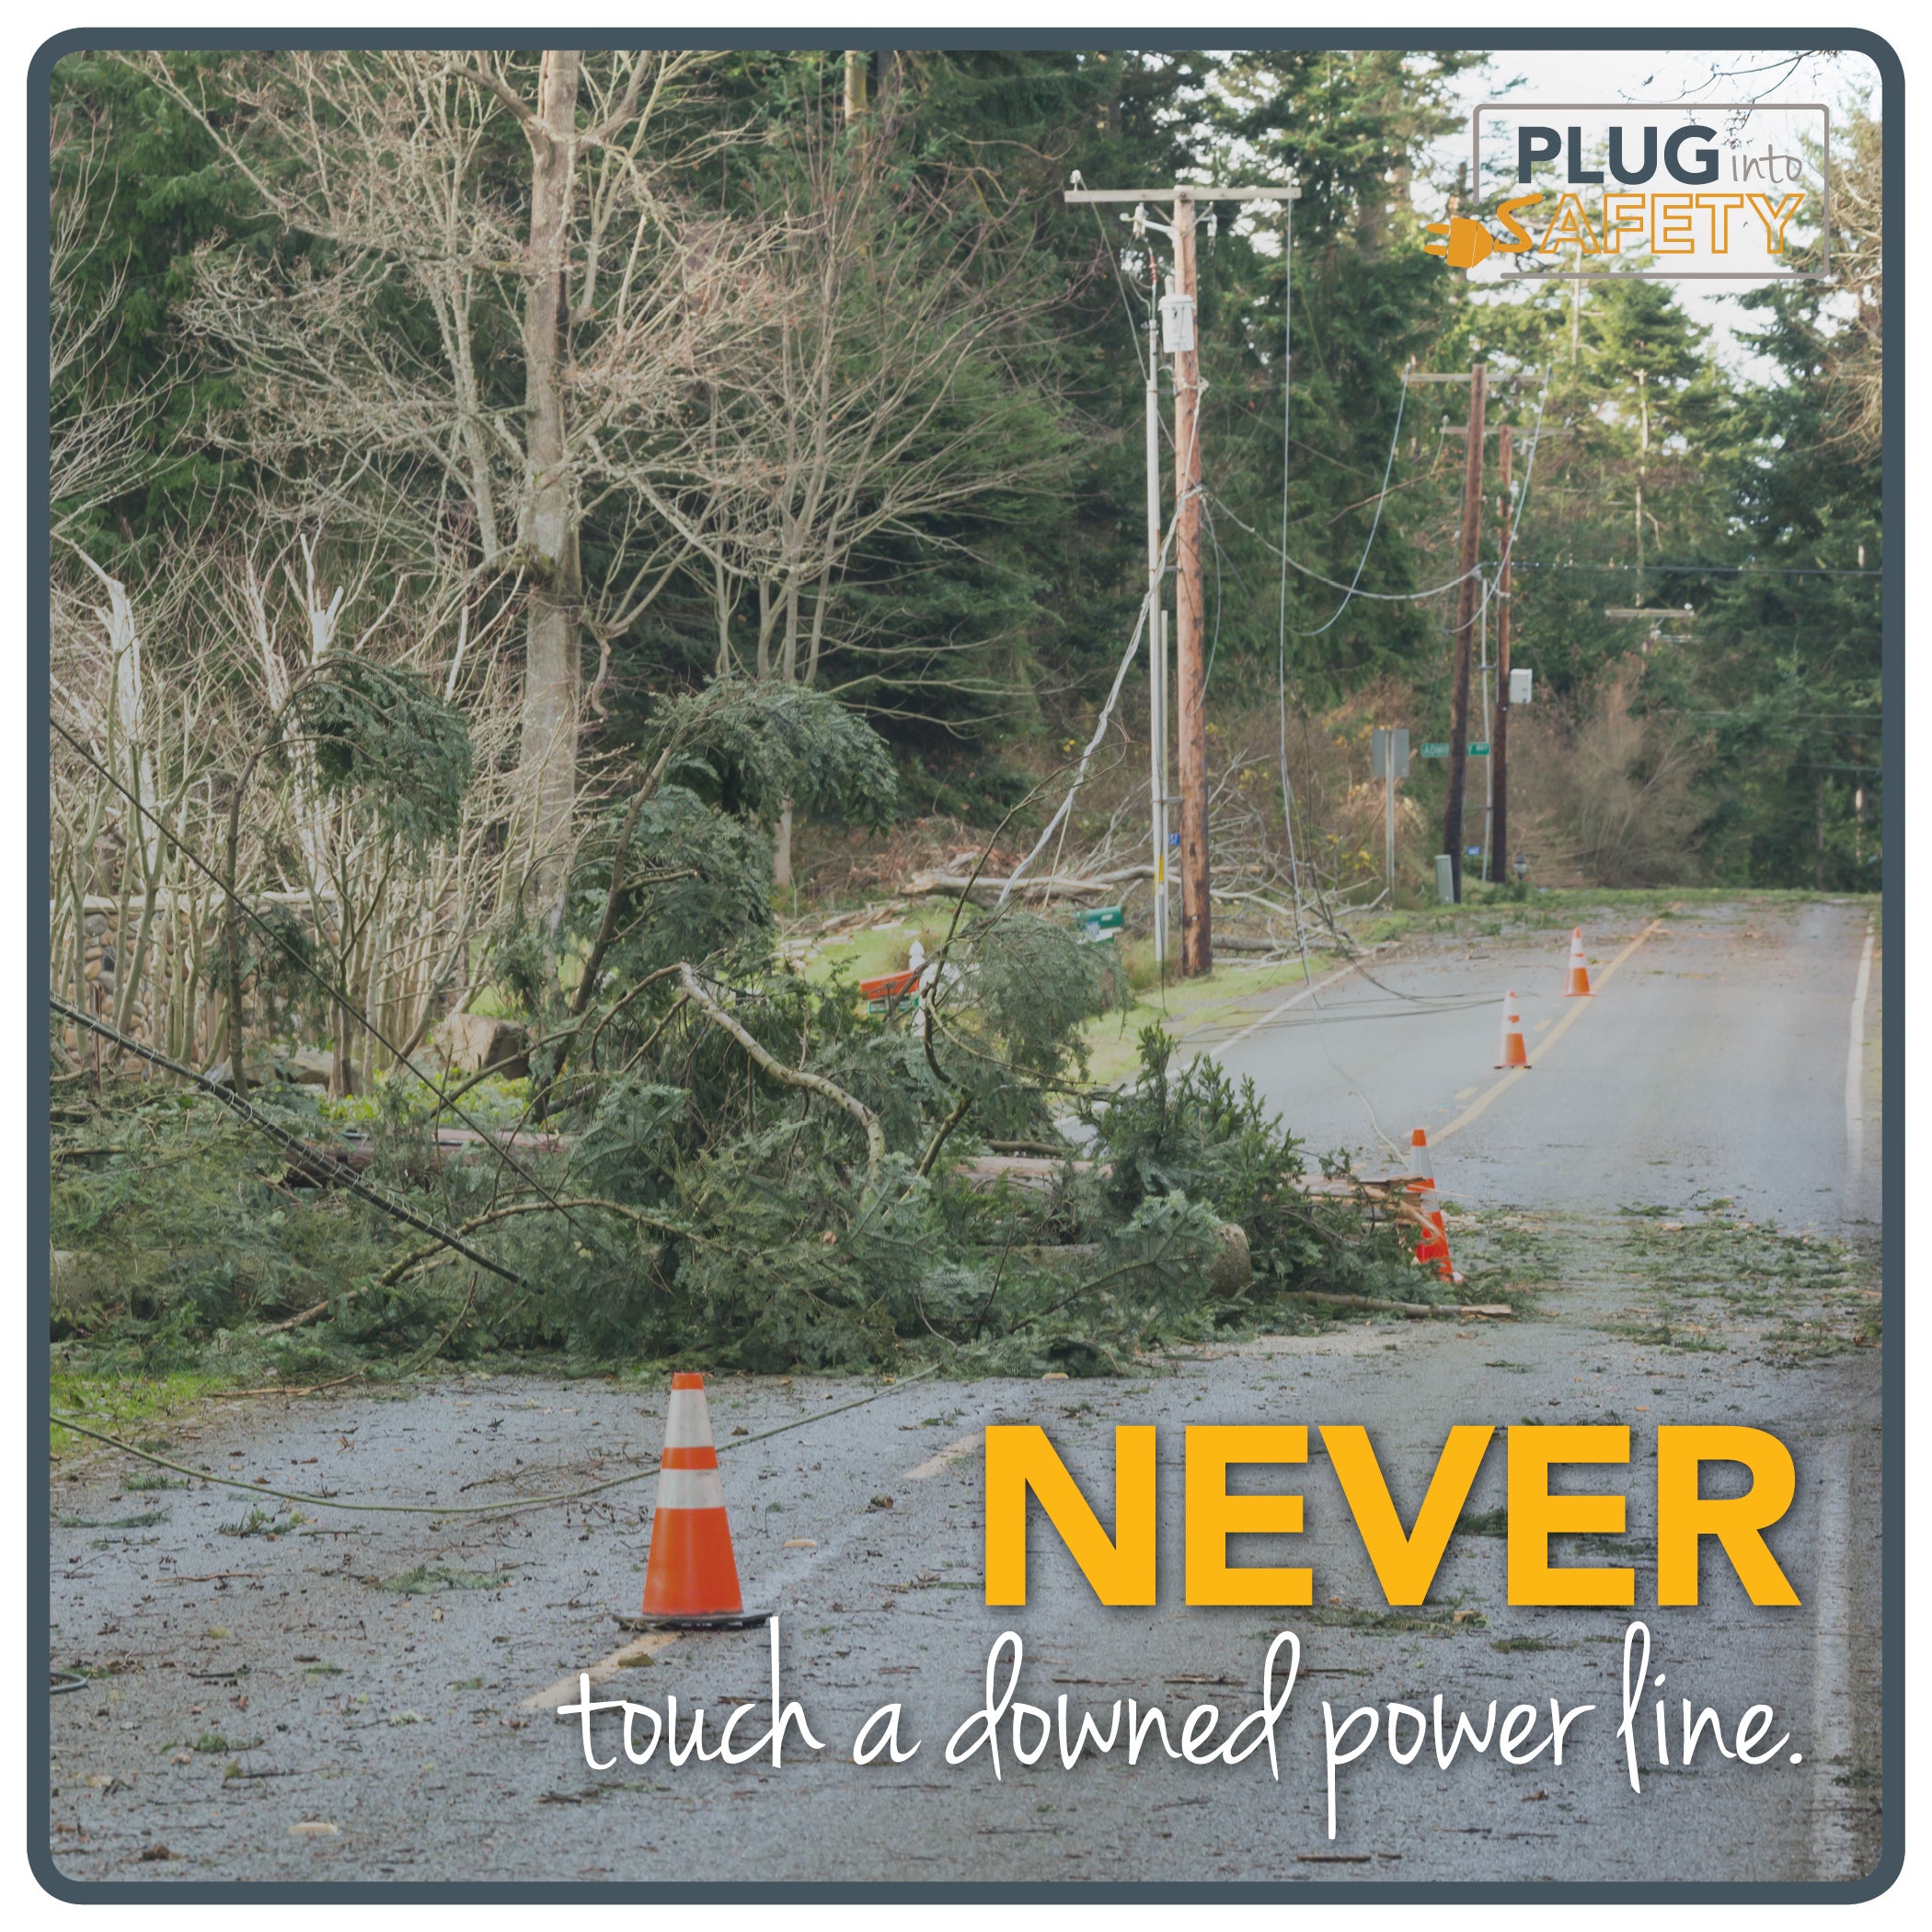 Never touch a downed power line.